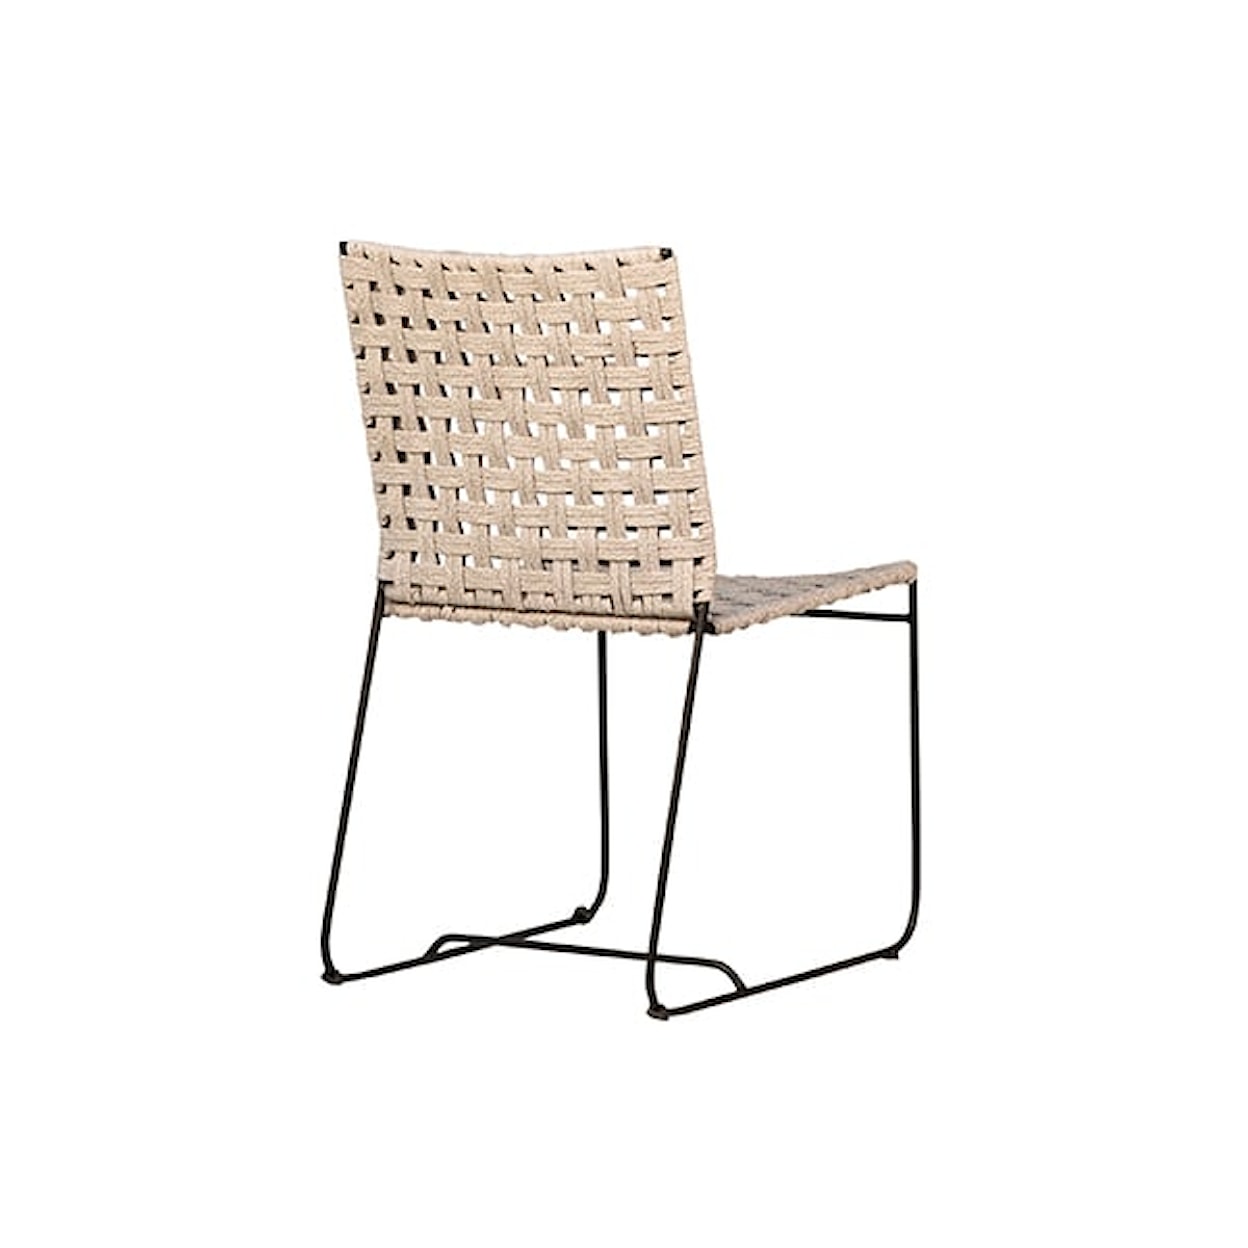 Dovetail Furniture Outdoor Ezra Dining Chair